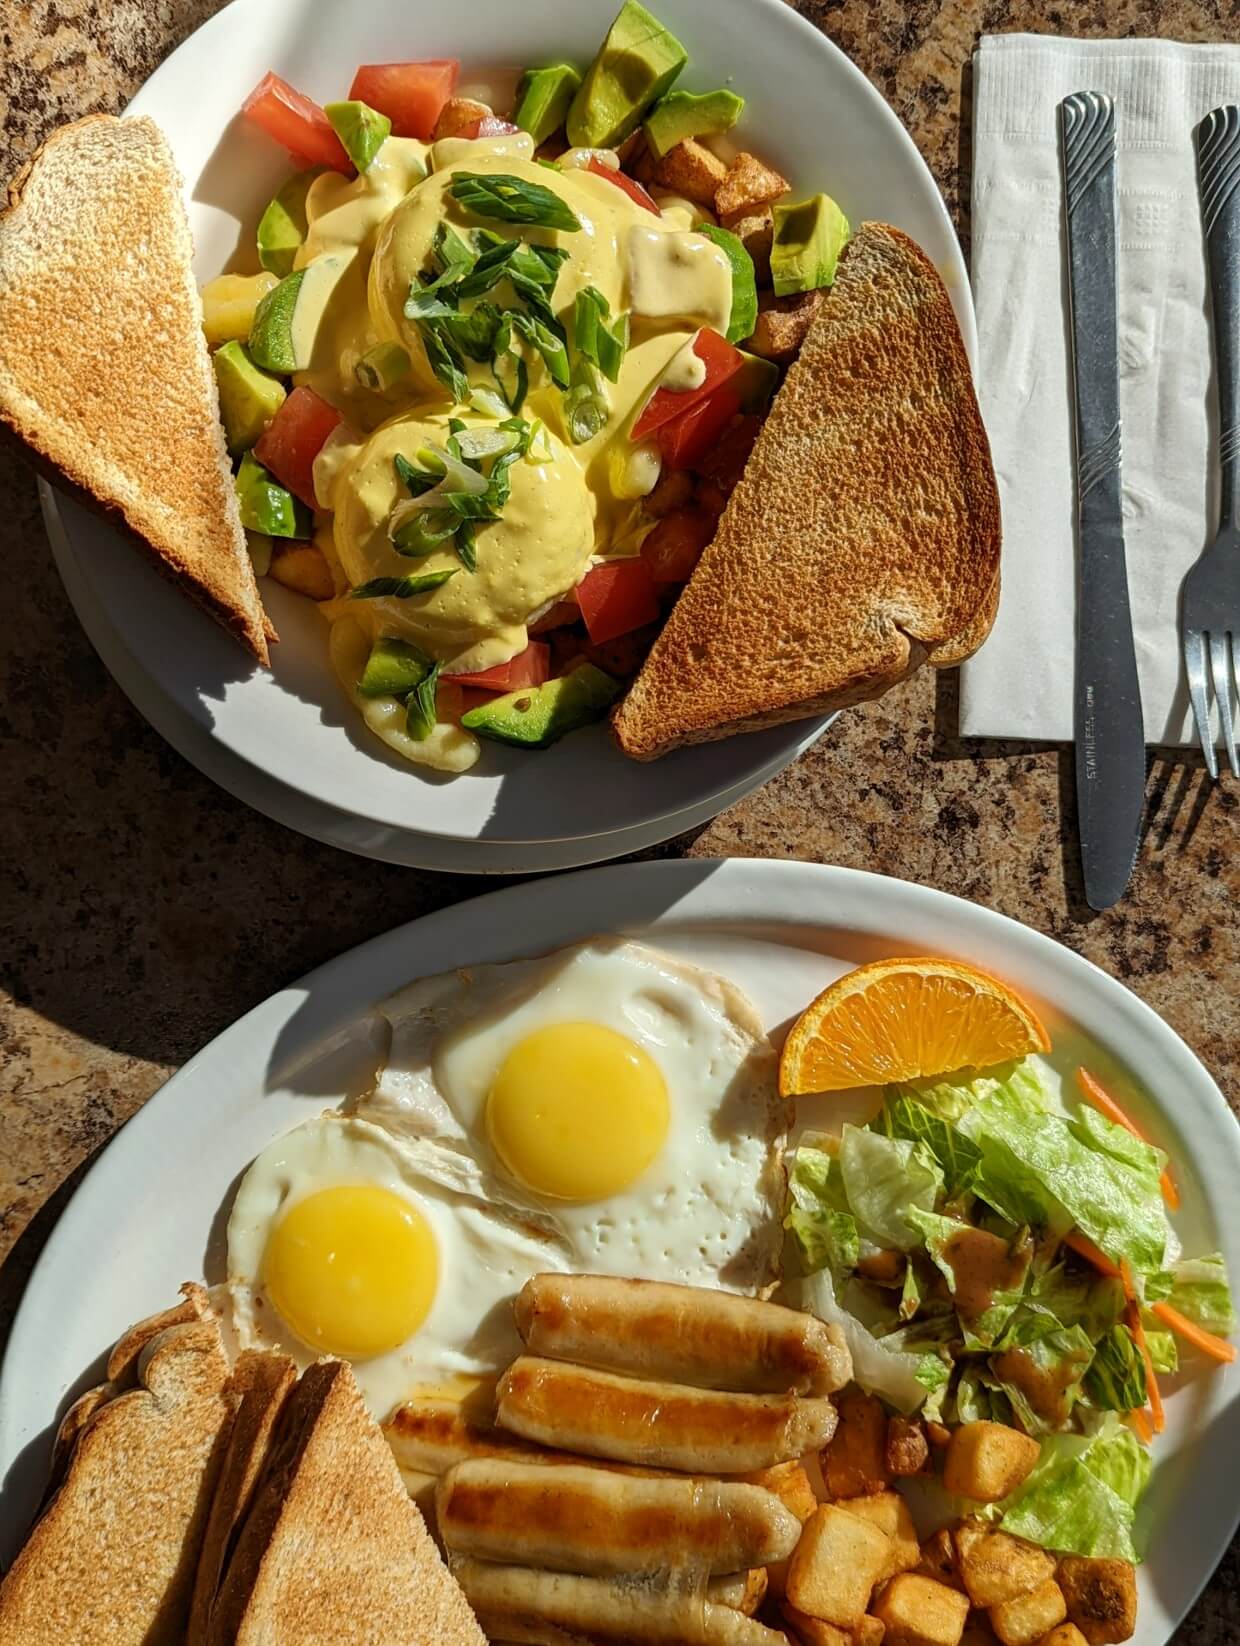 Overhead view of breakfast dishes at Brunch Glory, both featuring toast and eggs on white plates